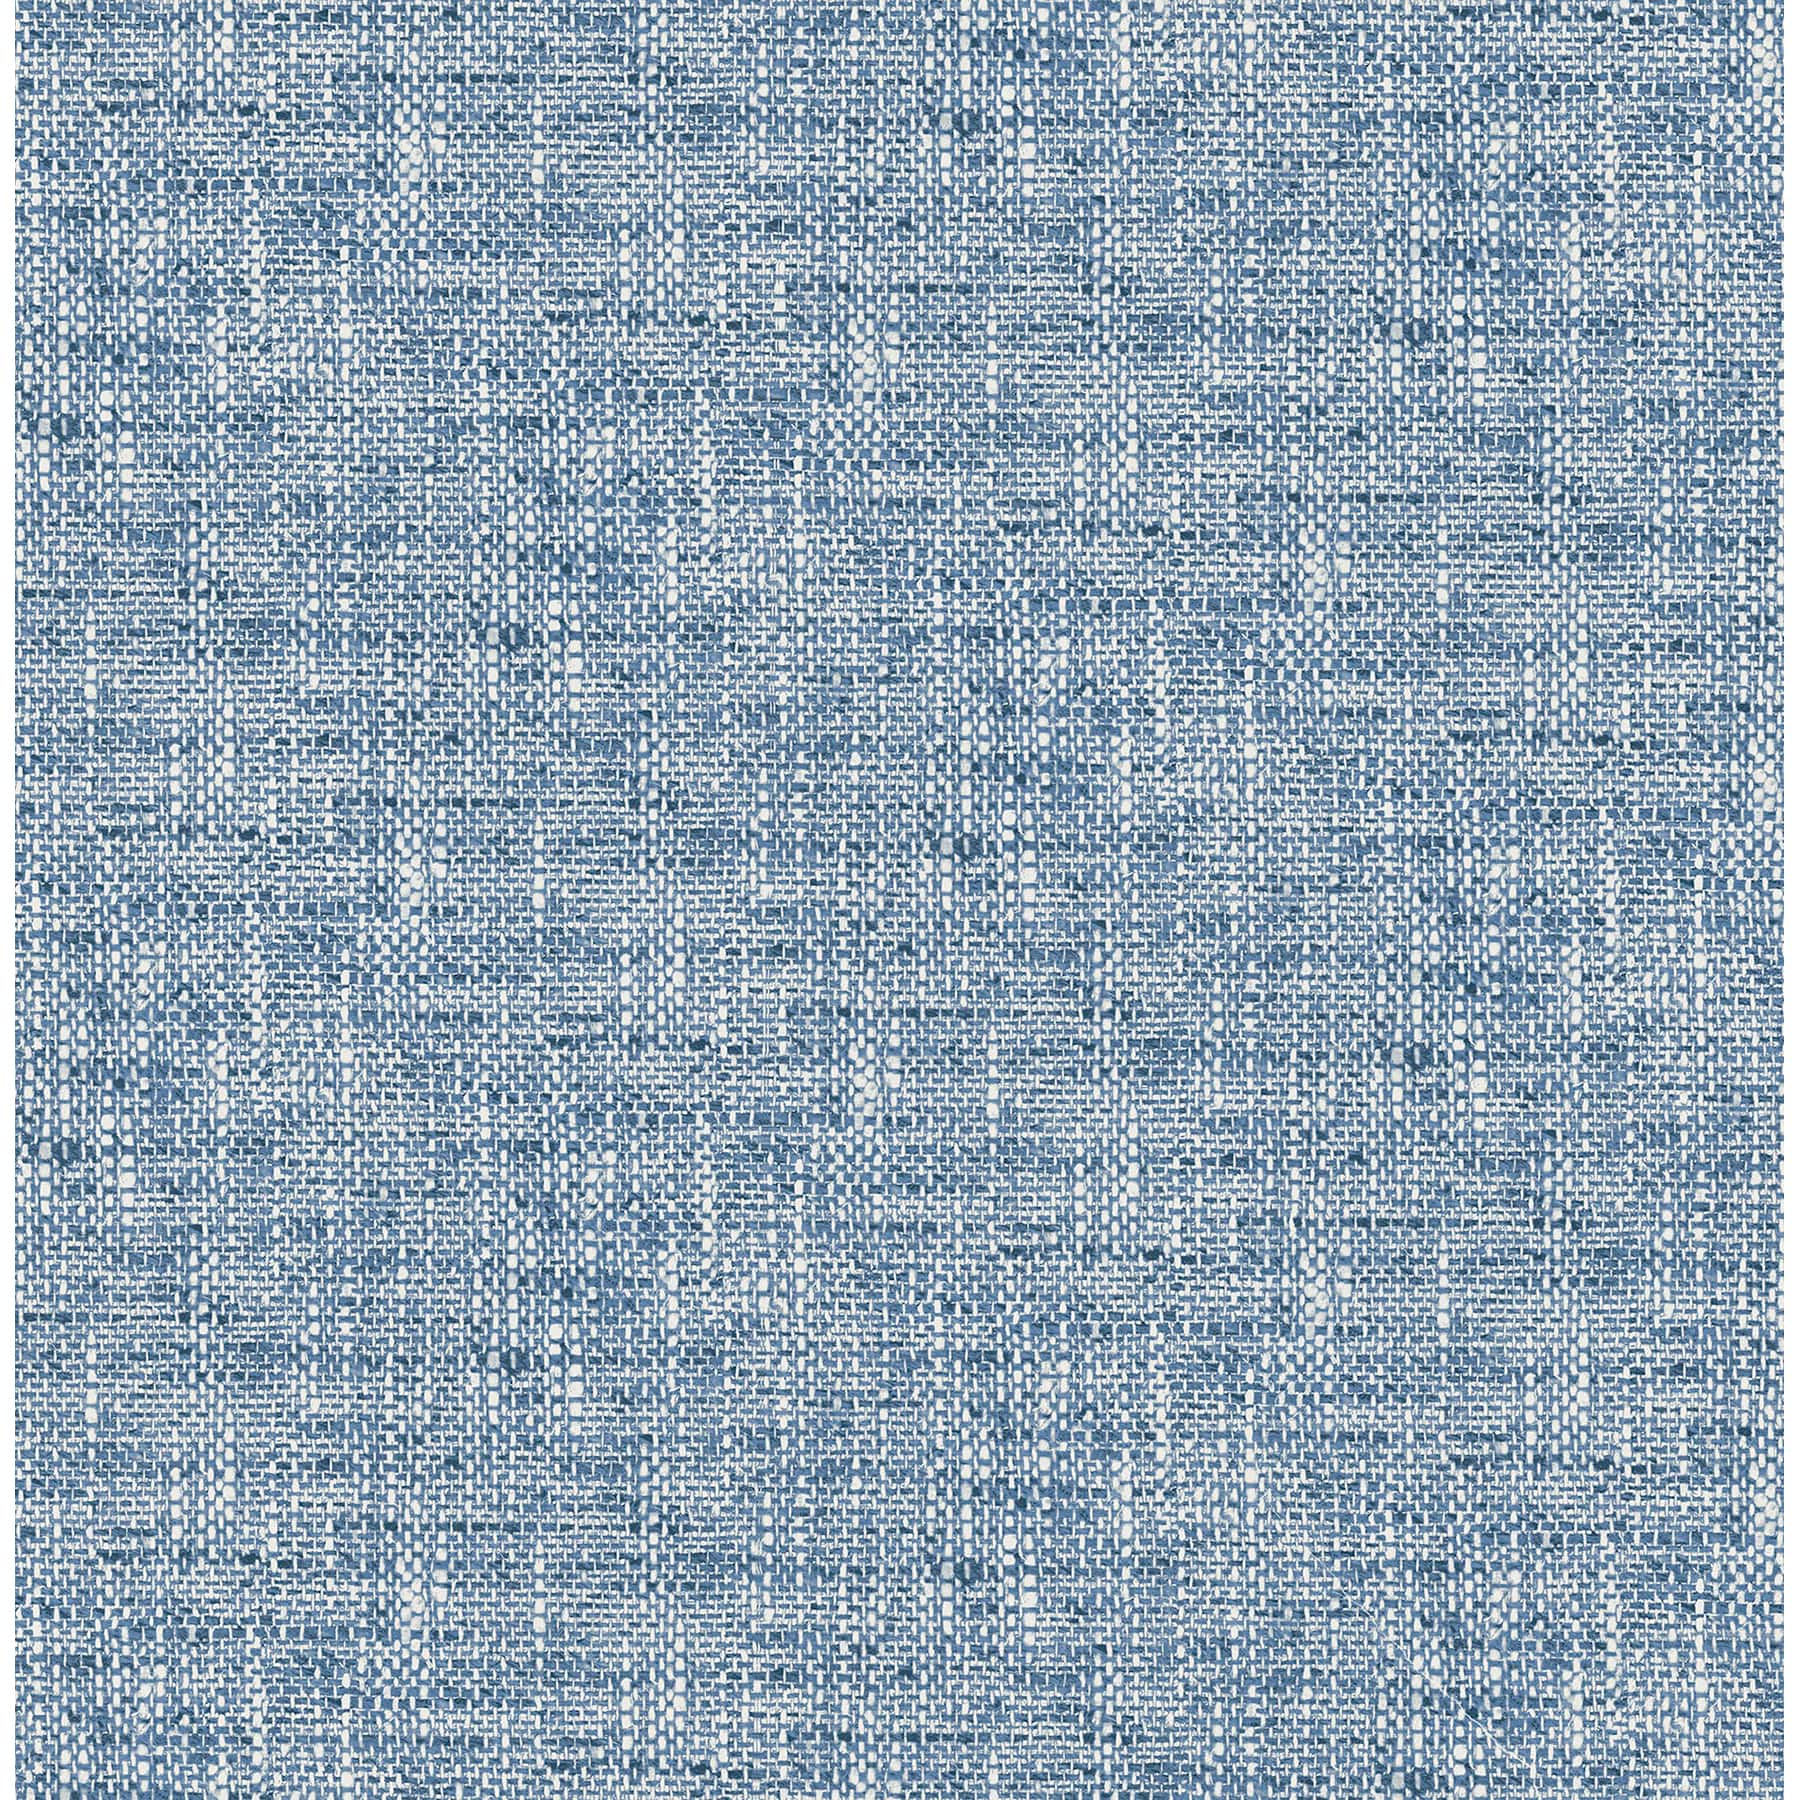 RoomMates RMK11698RL Navy Faux Grasscloth Weave NonTextured Peel and Stick  Wallpaper Navy   Amazoncom